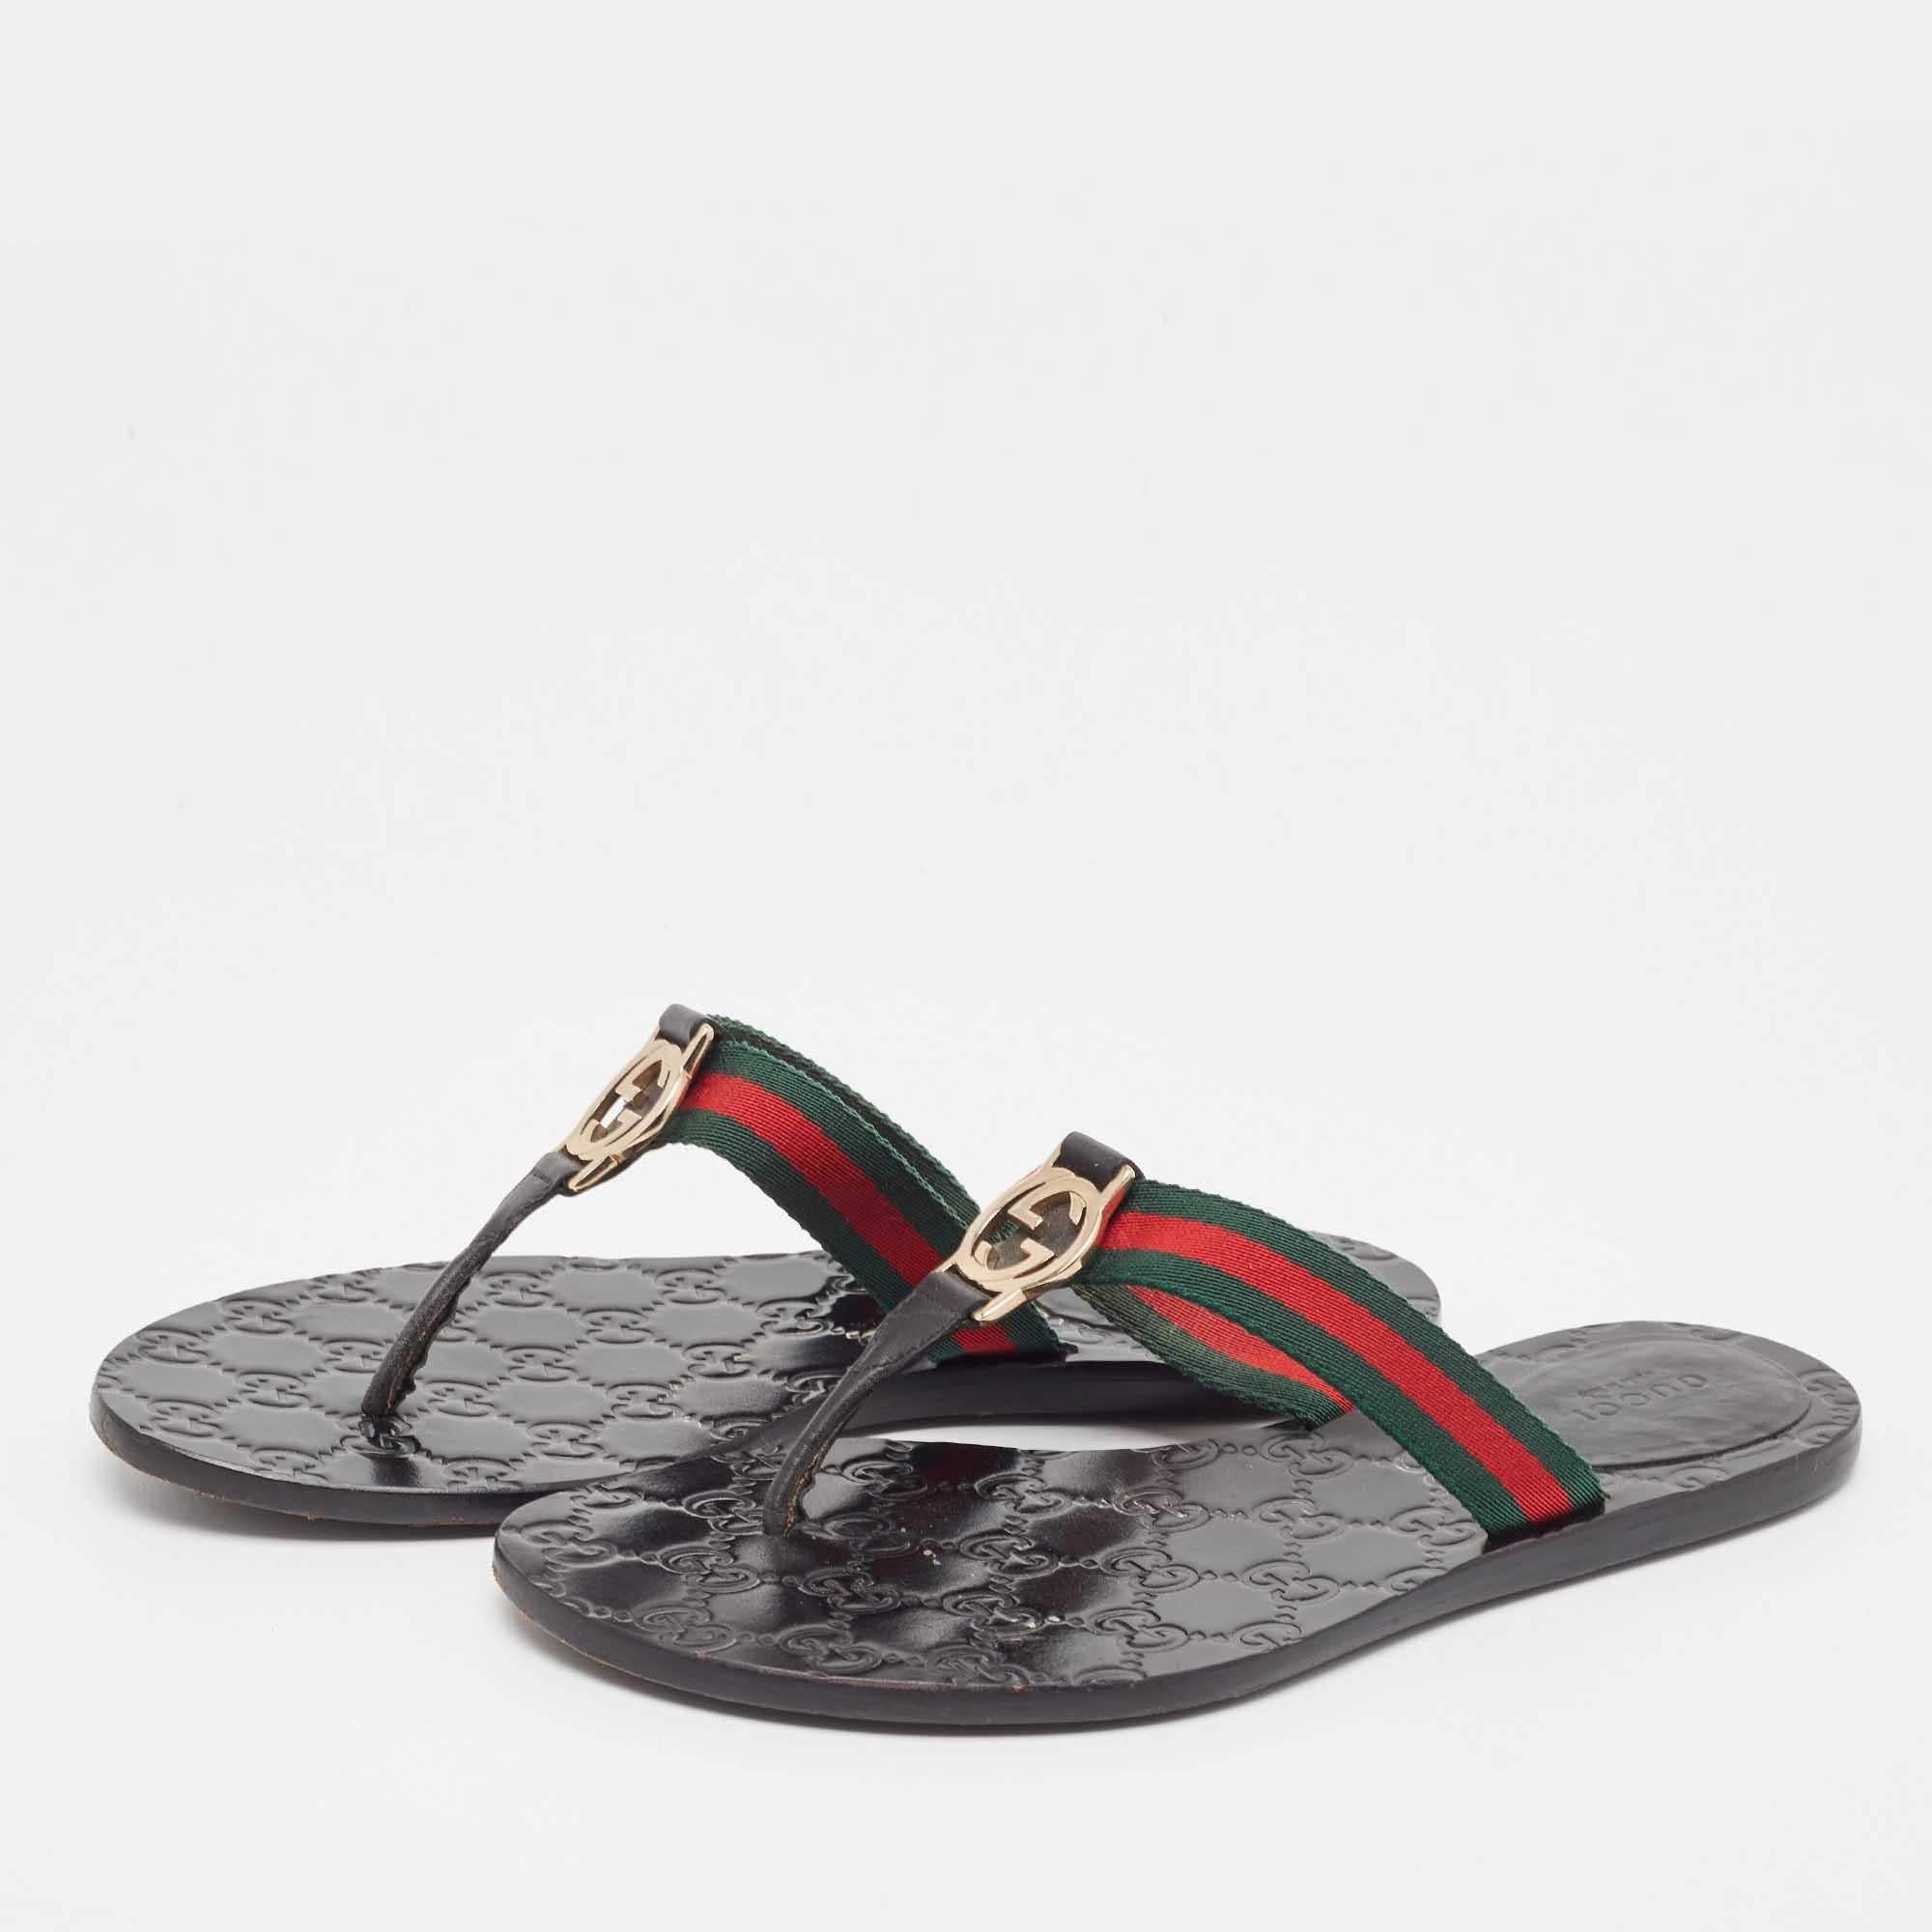 Designed with several House elements together, these Gucci sandals will infuse luxury into your outfit. The insole is detailed with a GG pattern, and they combine red and green Web straps with an interlocking 'G' motif on the front. Made from